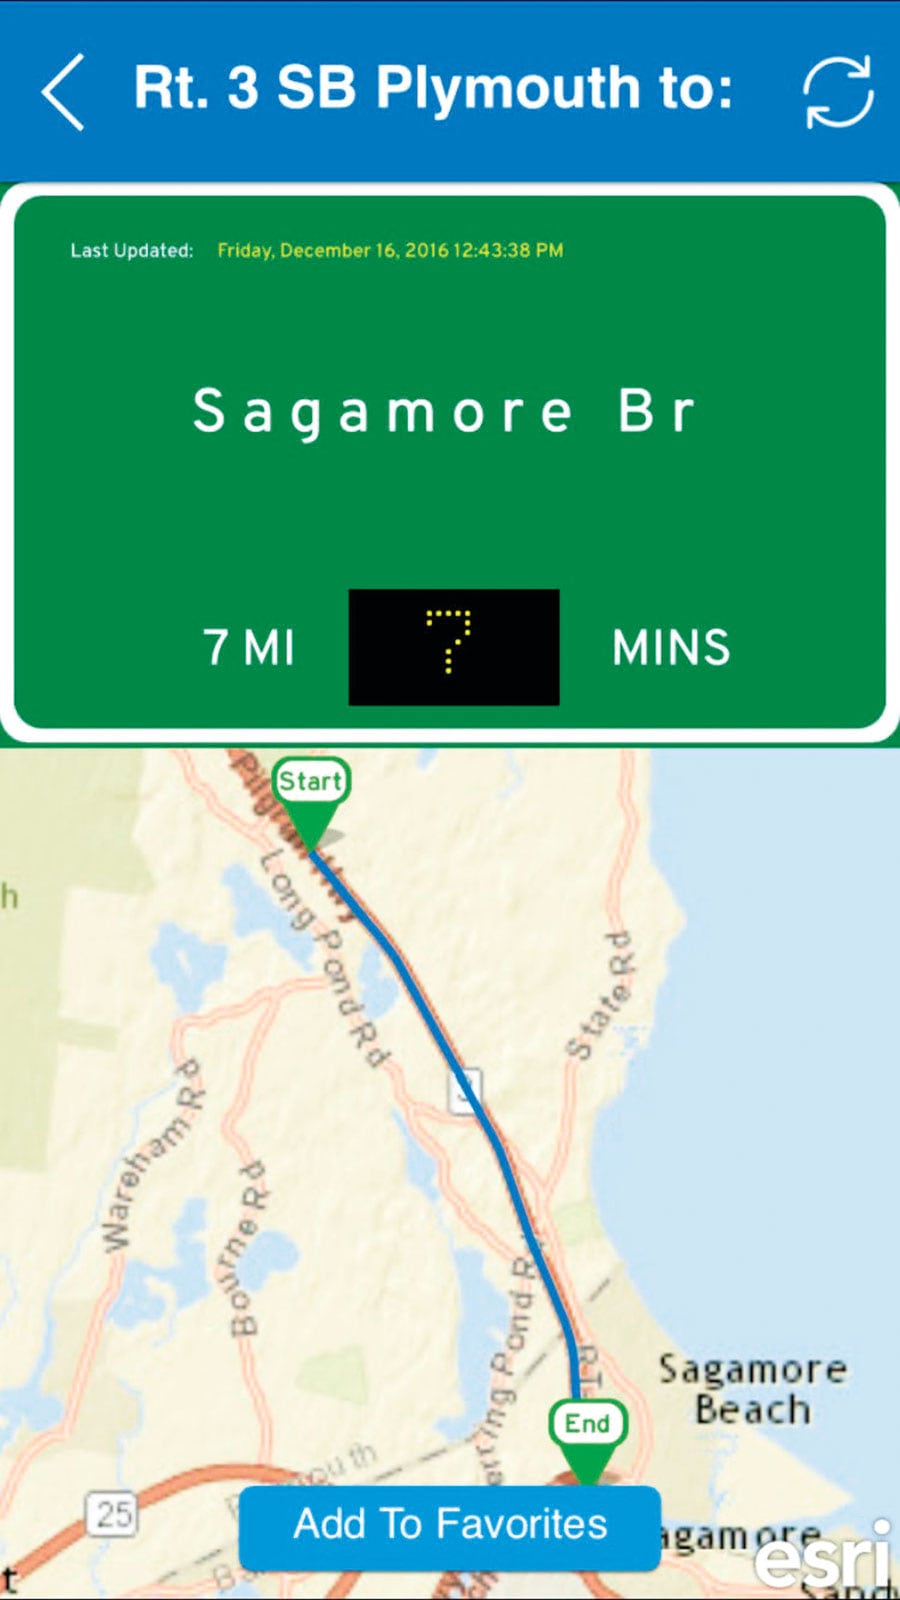 Users can see their selected route from start to finish. They can also add signs to their Favorites list.